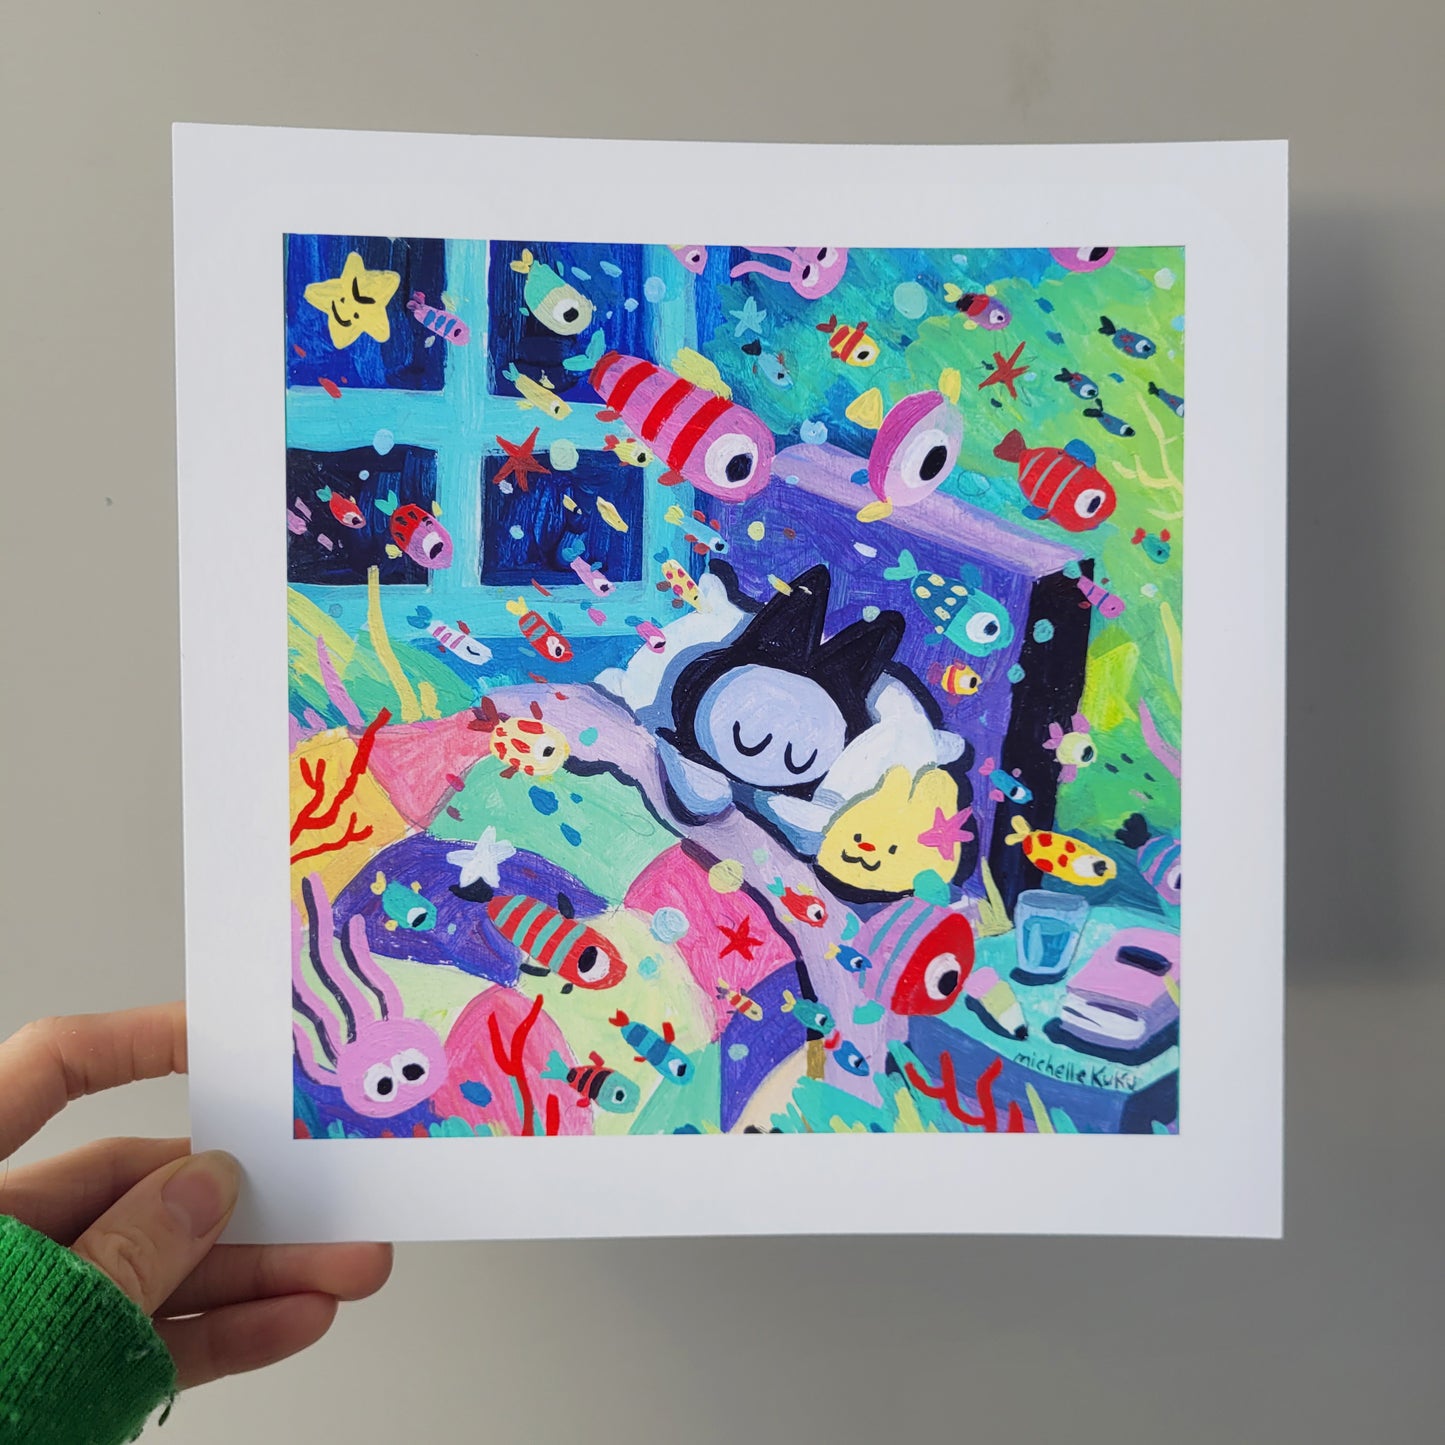 Wishing for Fish - Open Edition Print